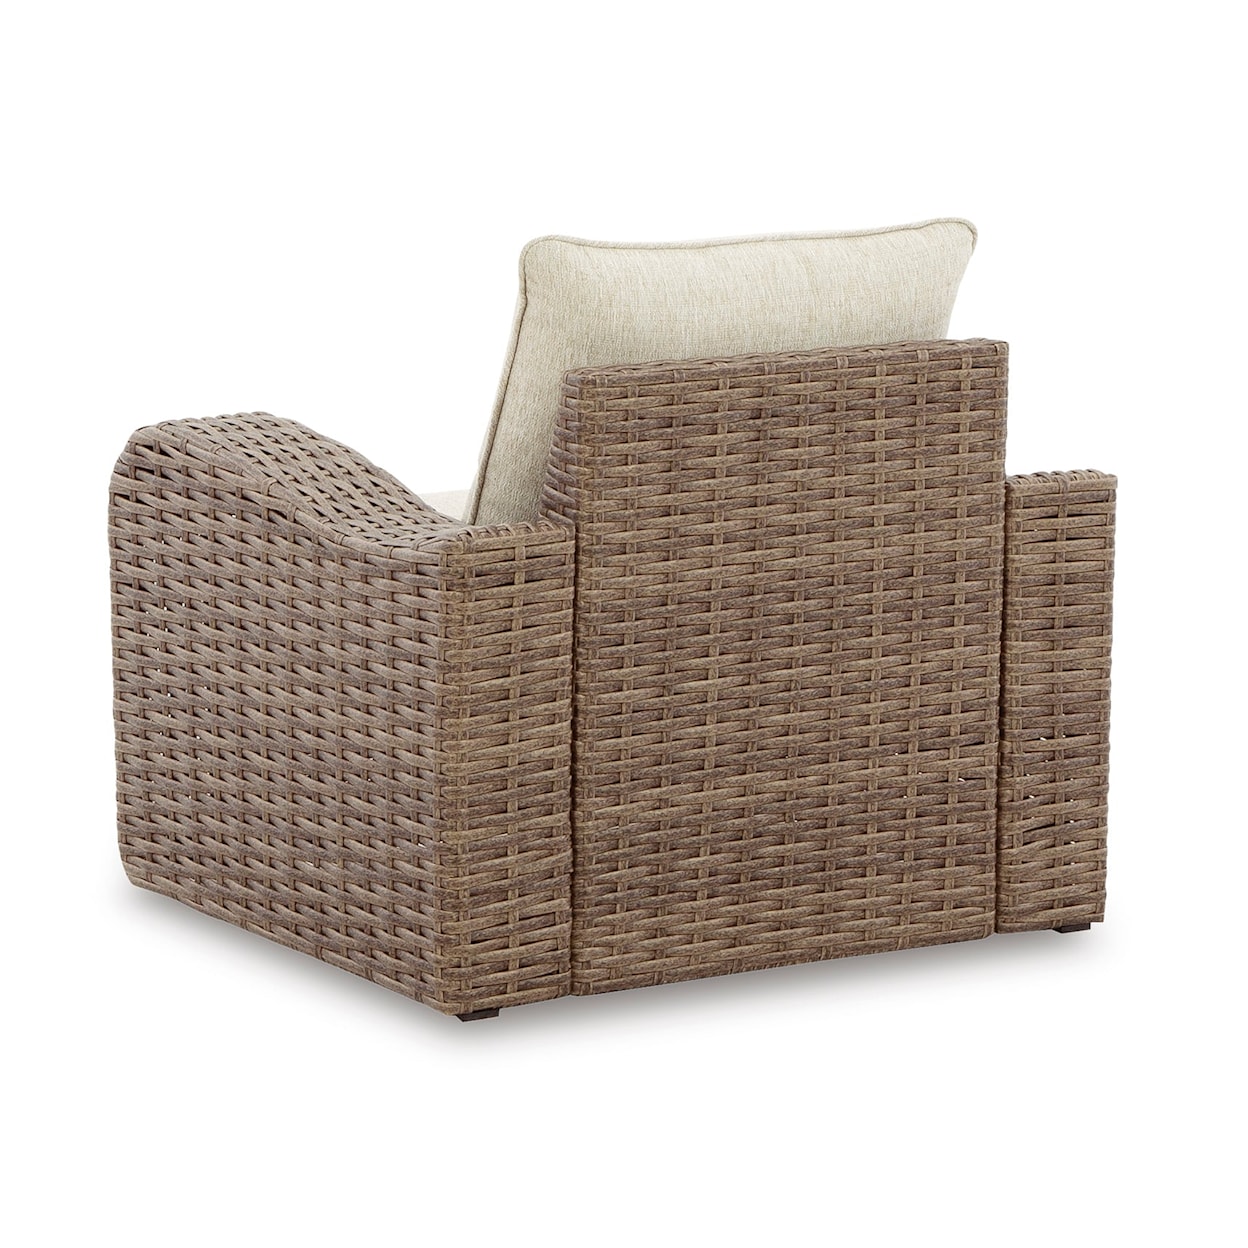 Signature Sandy Bloom Outdoor Lounge Chair with Cushion